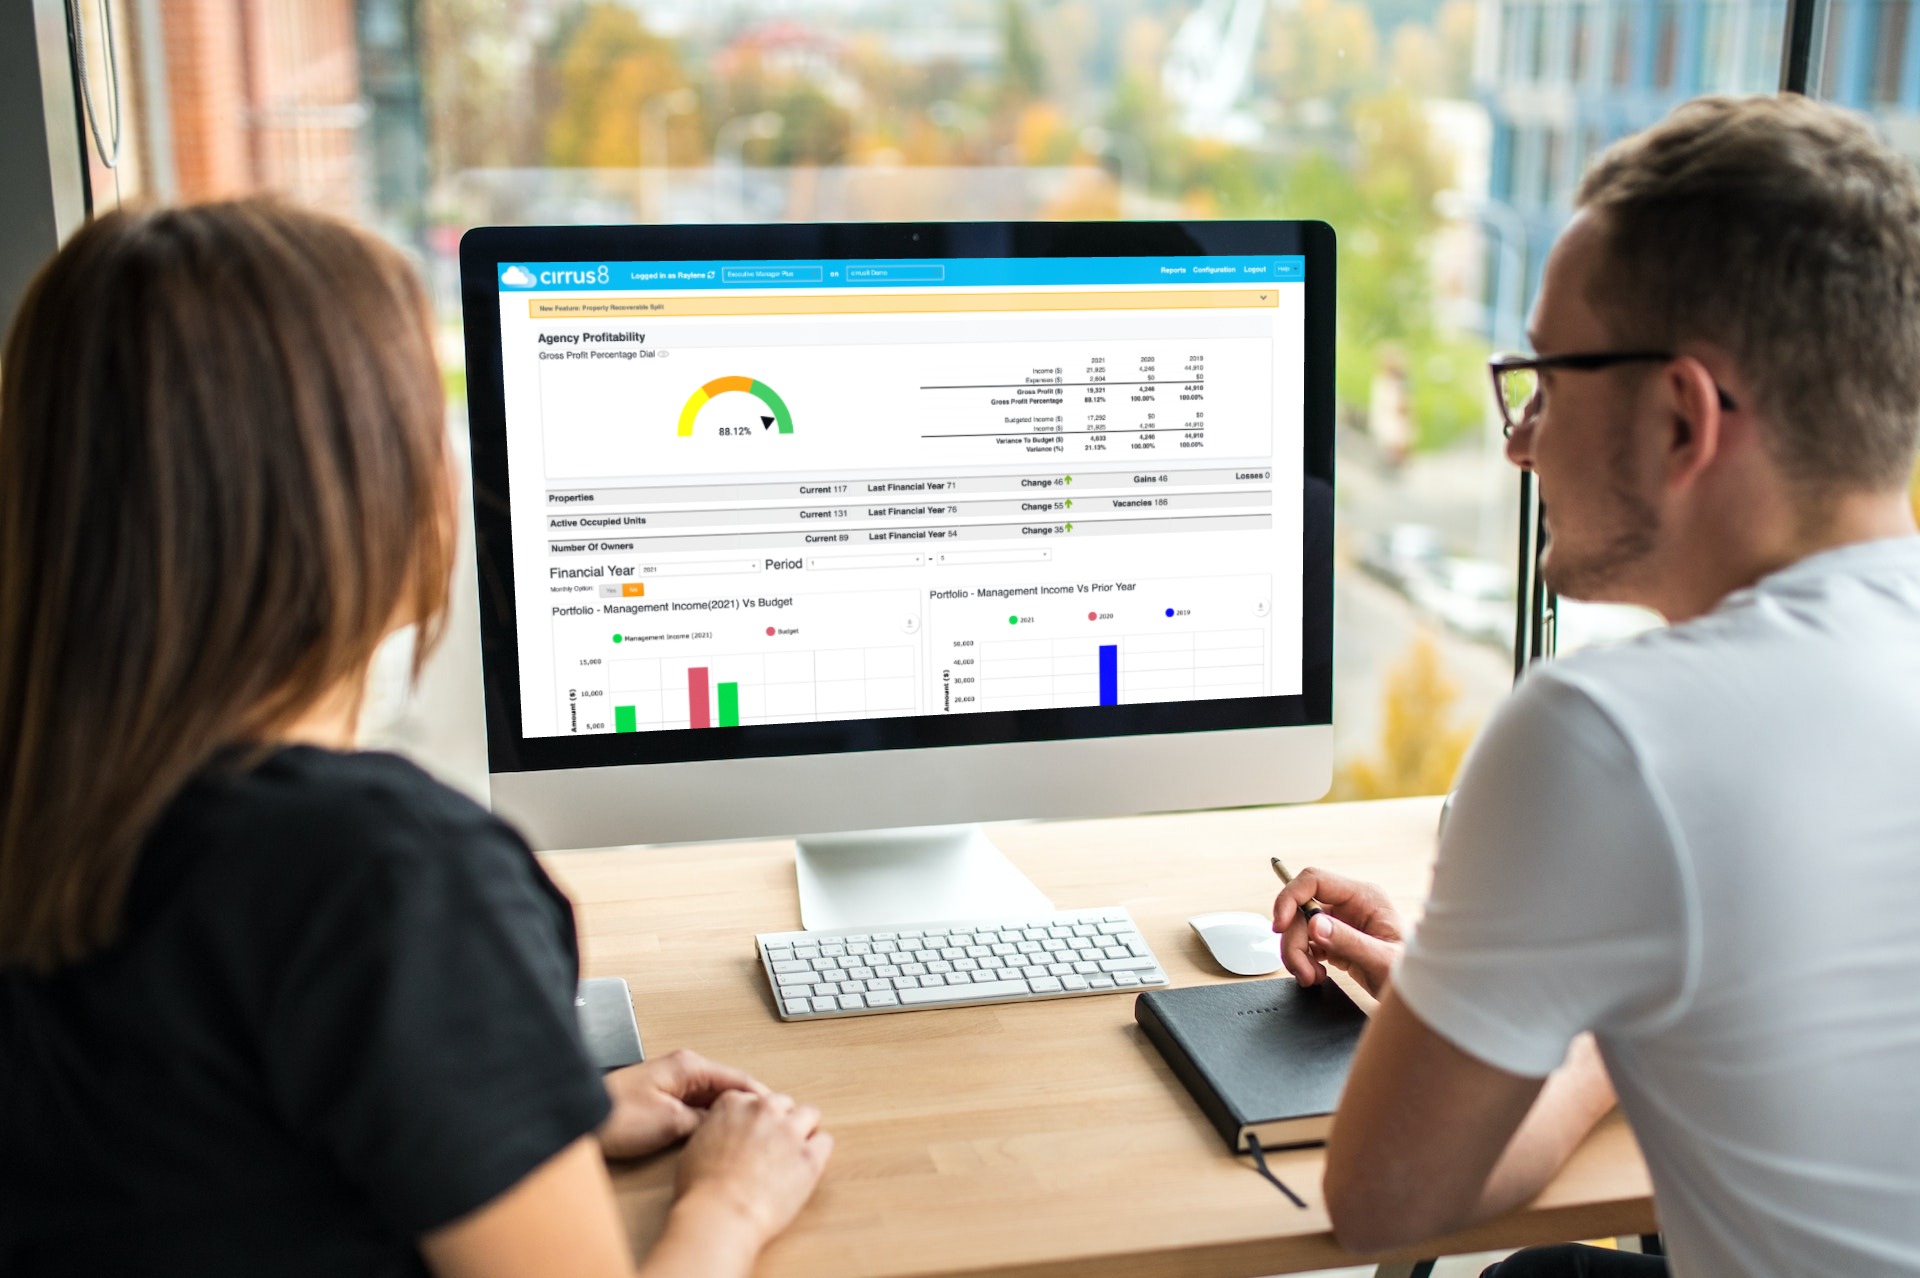 Unparalleled insight into your business’s profitability and cost management with an industry leading business analytics dashboard that captures and displays key business metrics in easy-to-understand graphs.